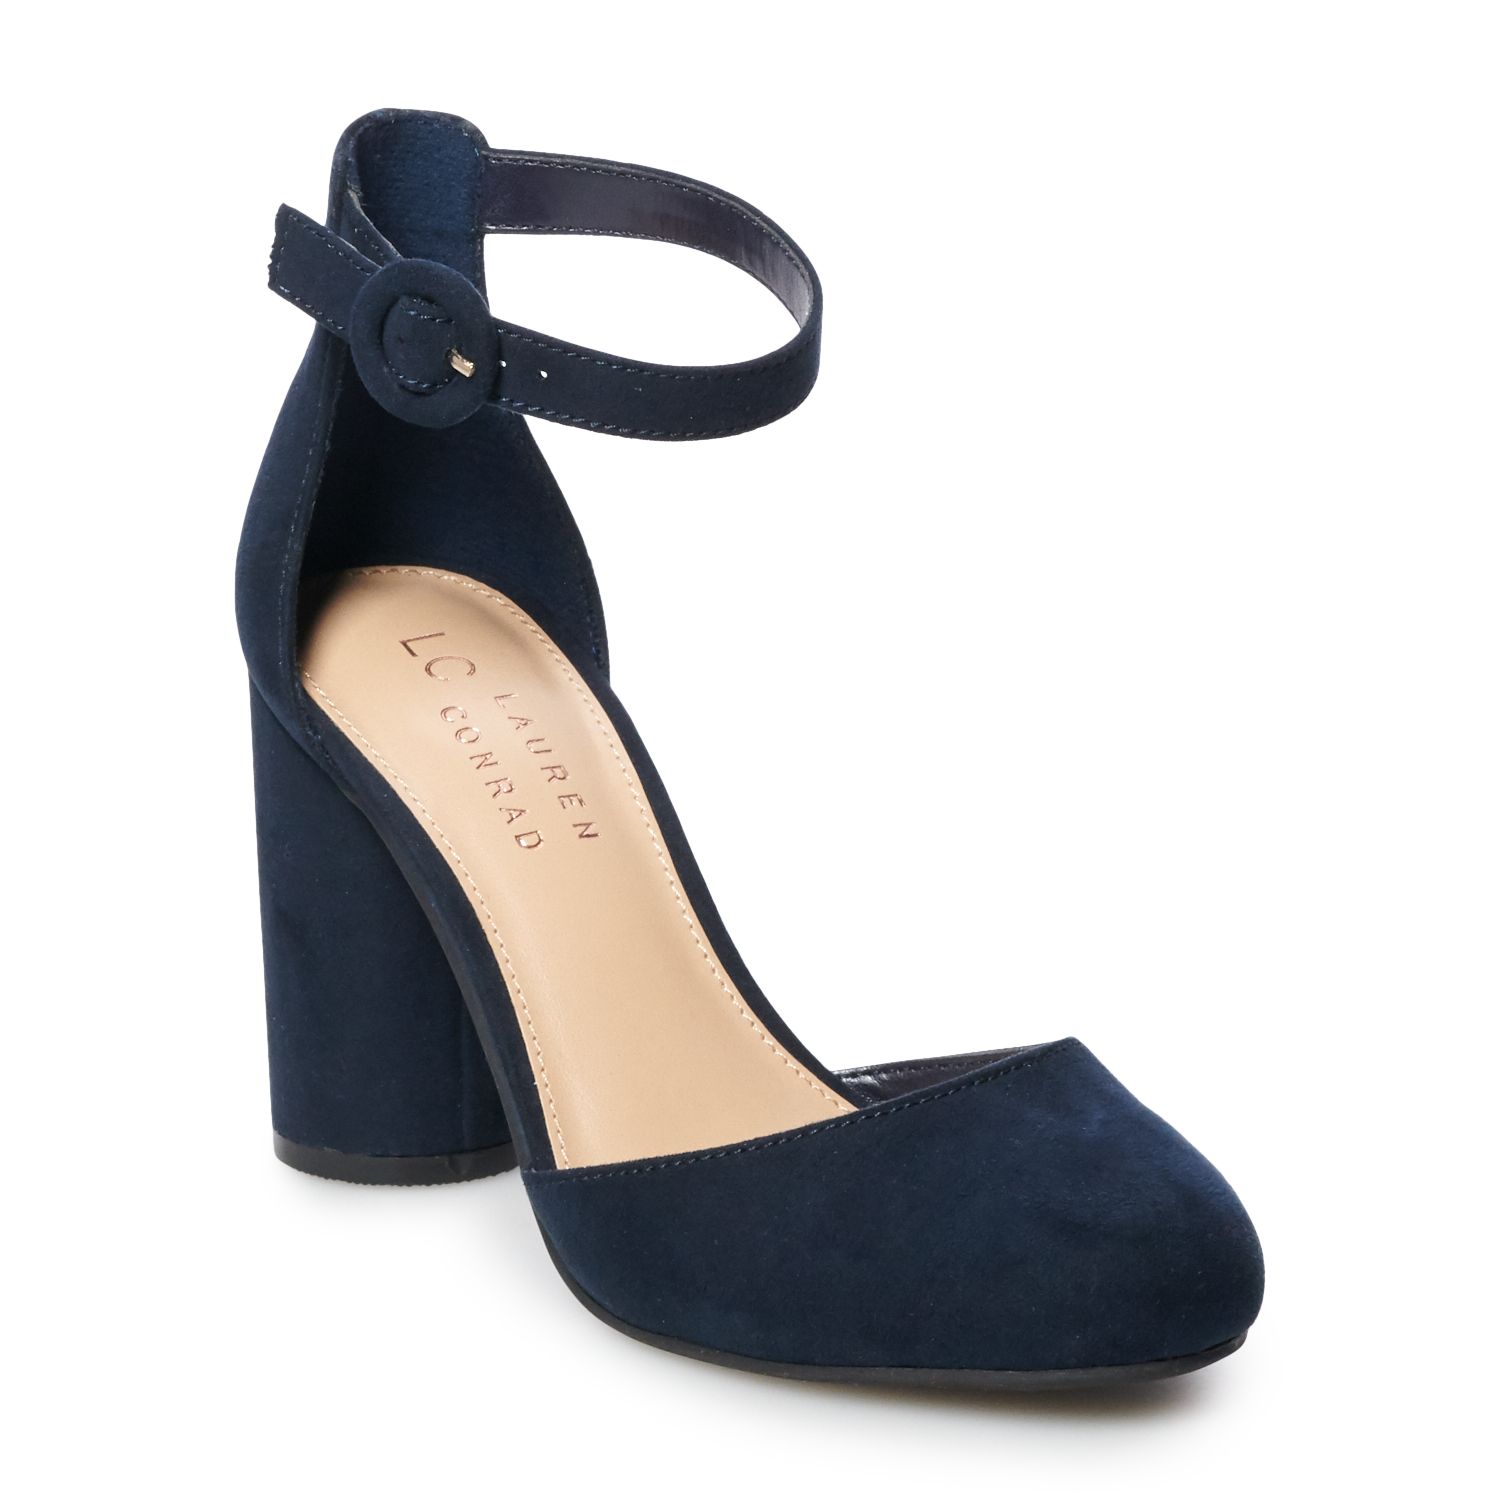 navy blue prom shoes